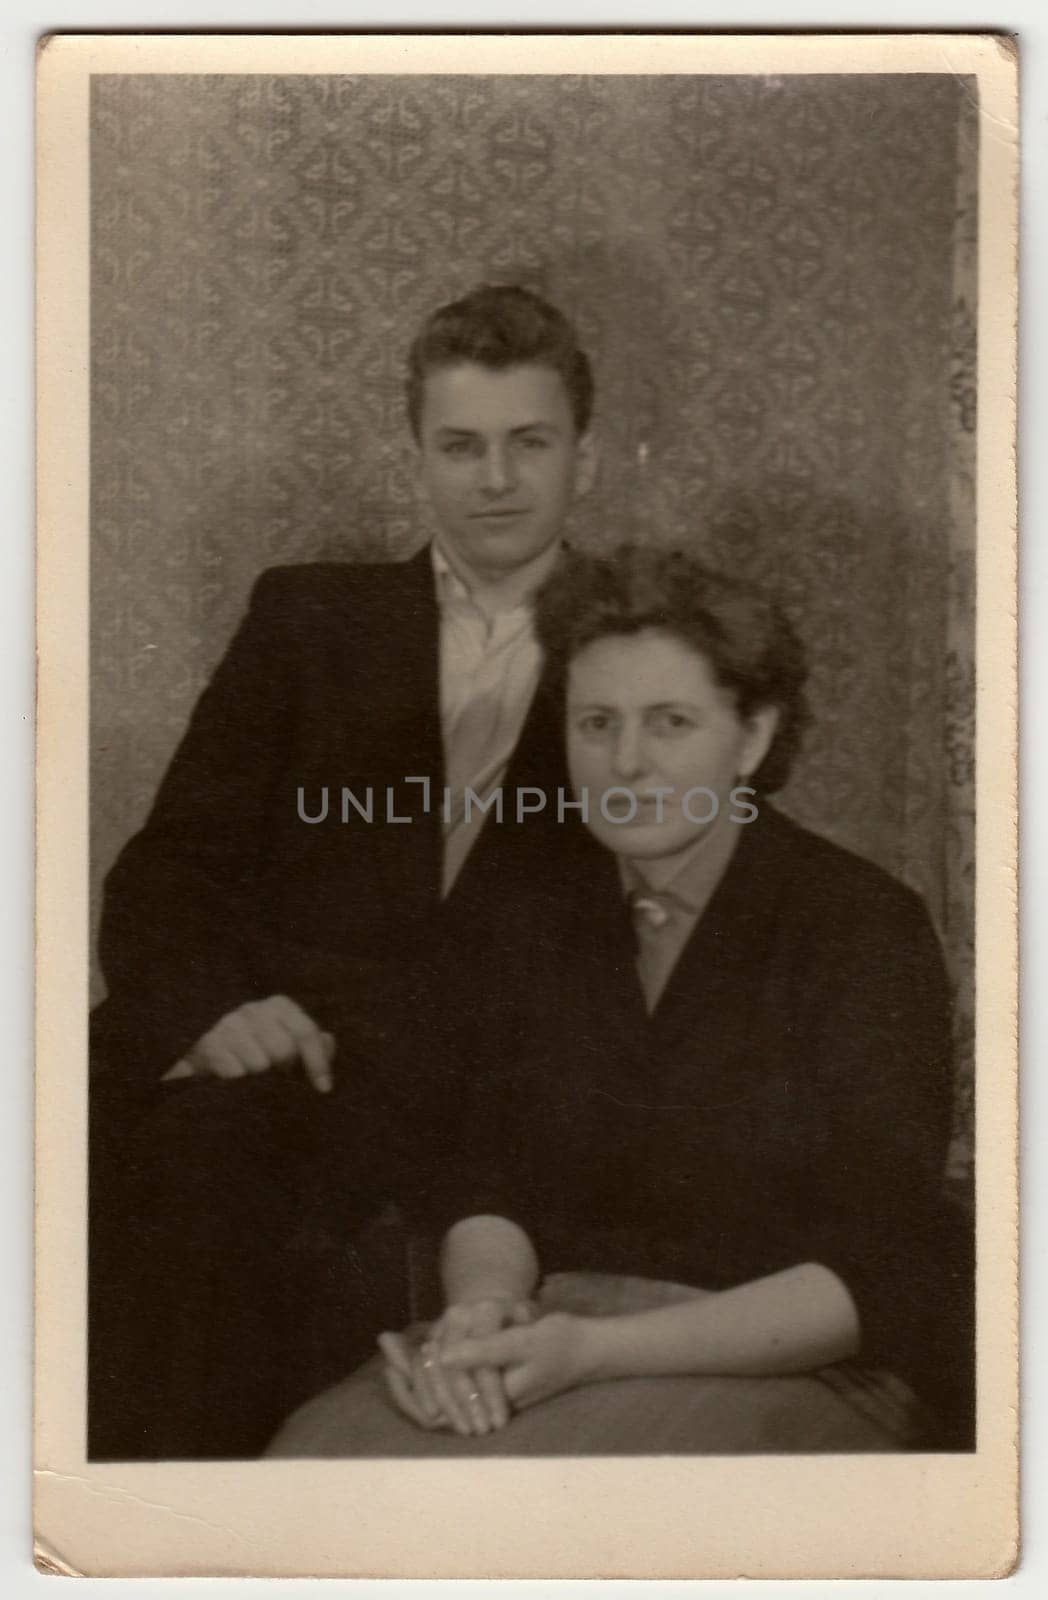 A vintage photo shows mother with adolescent son. by roman_nerud